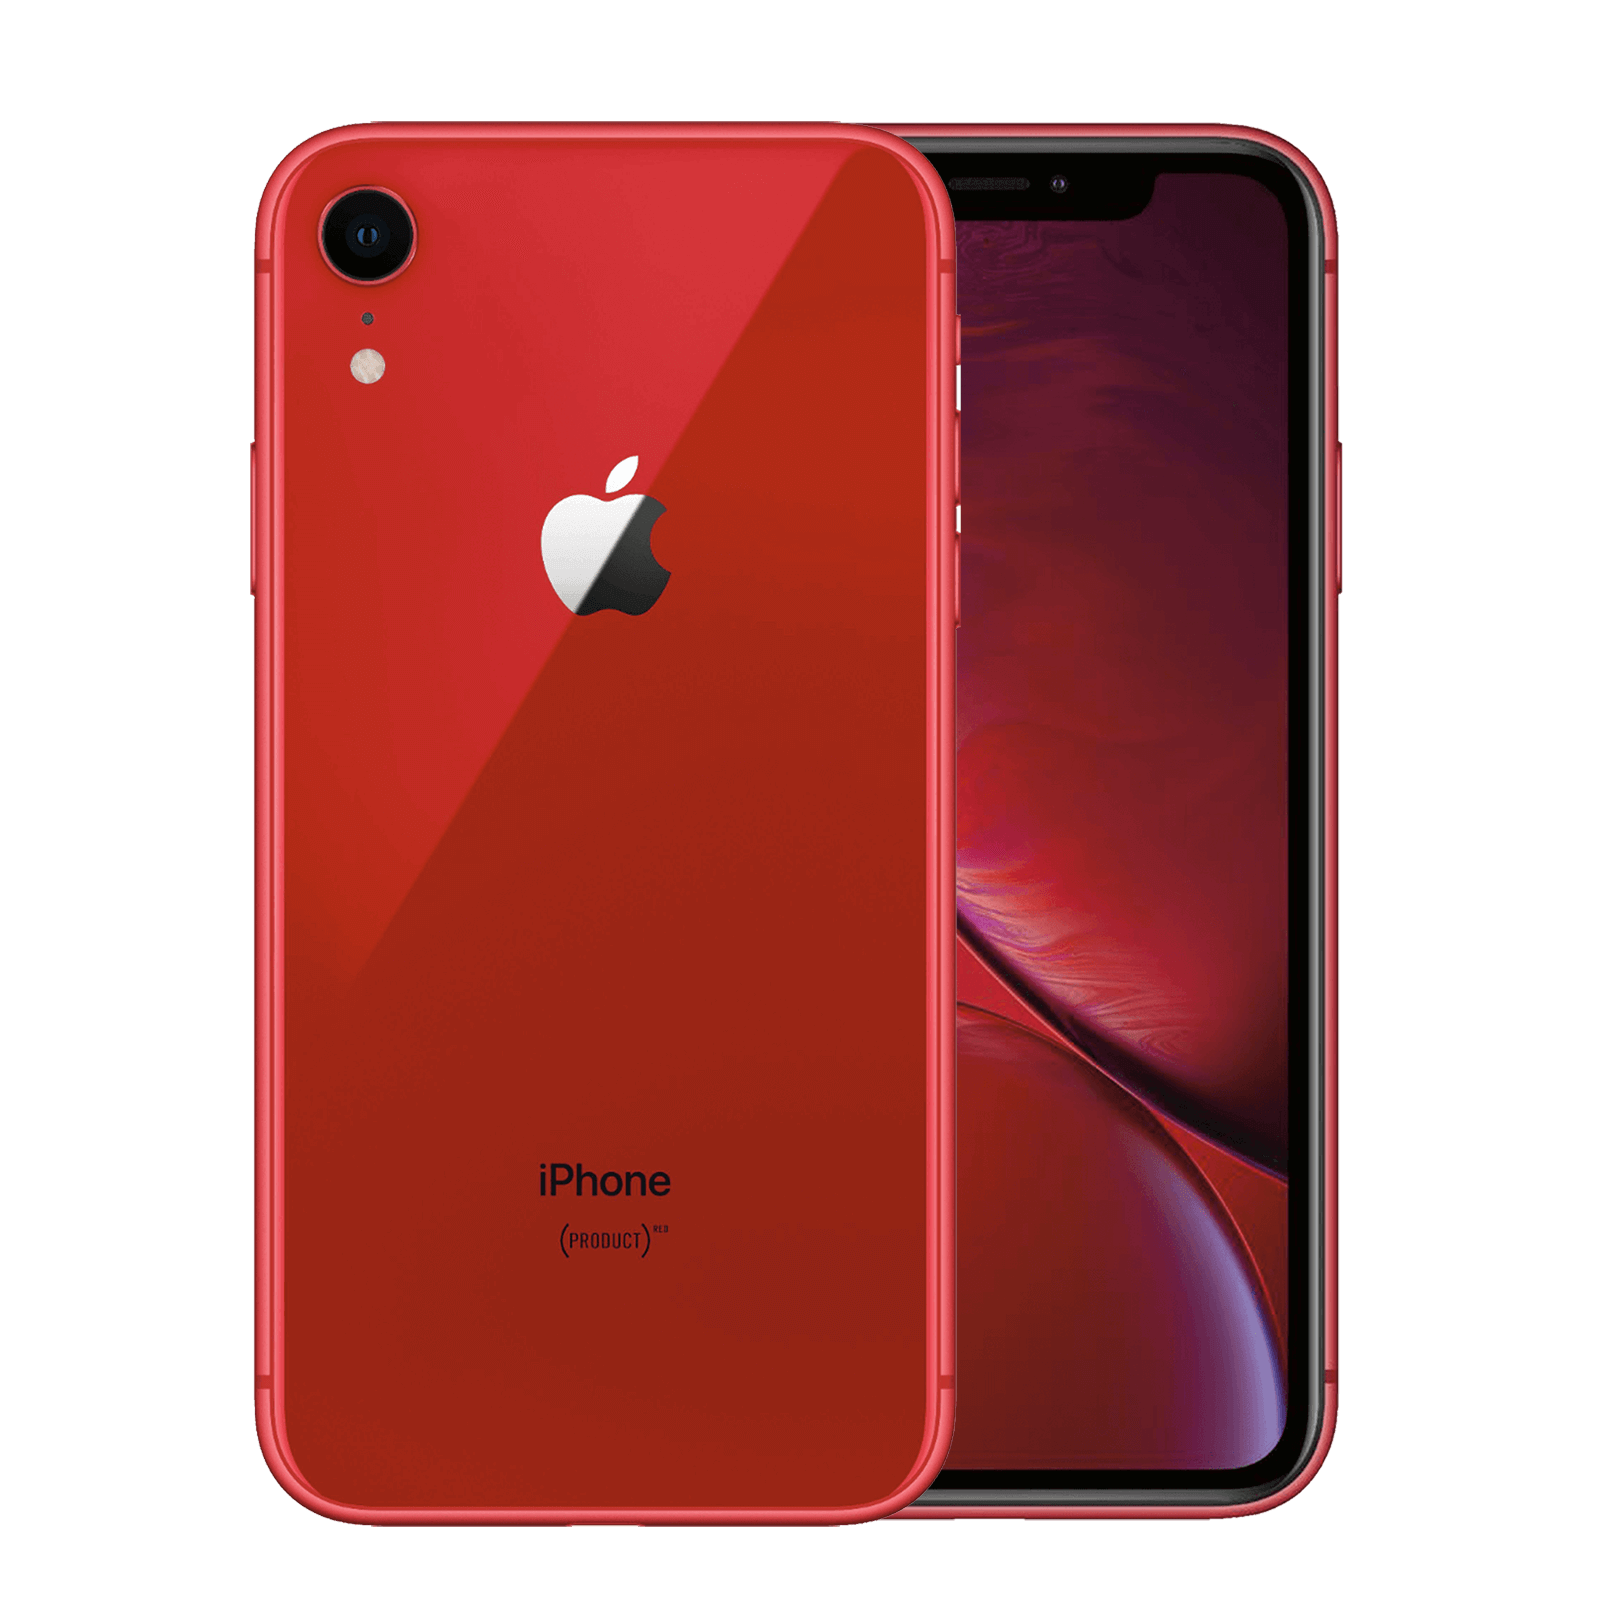 Apple iPhone XR 128GB Product Red Good - Unlocked